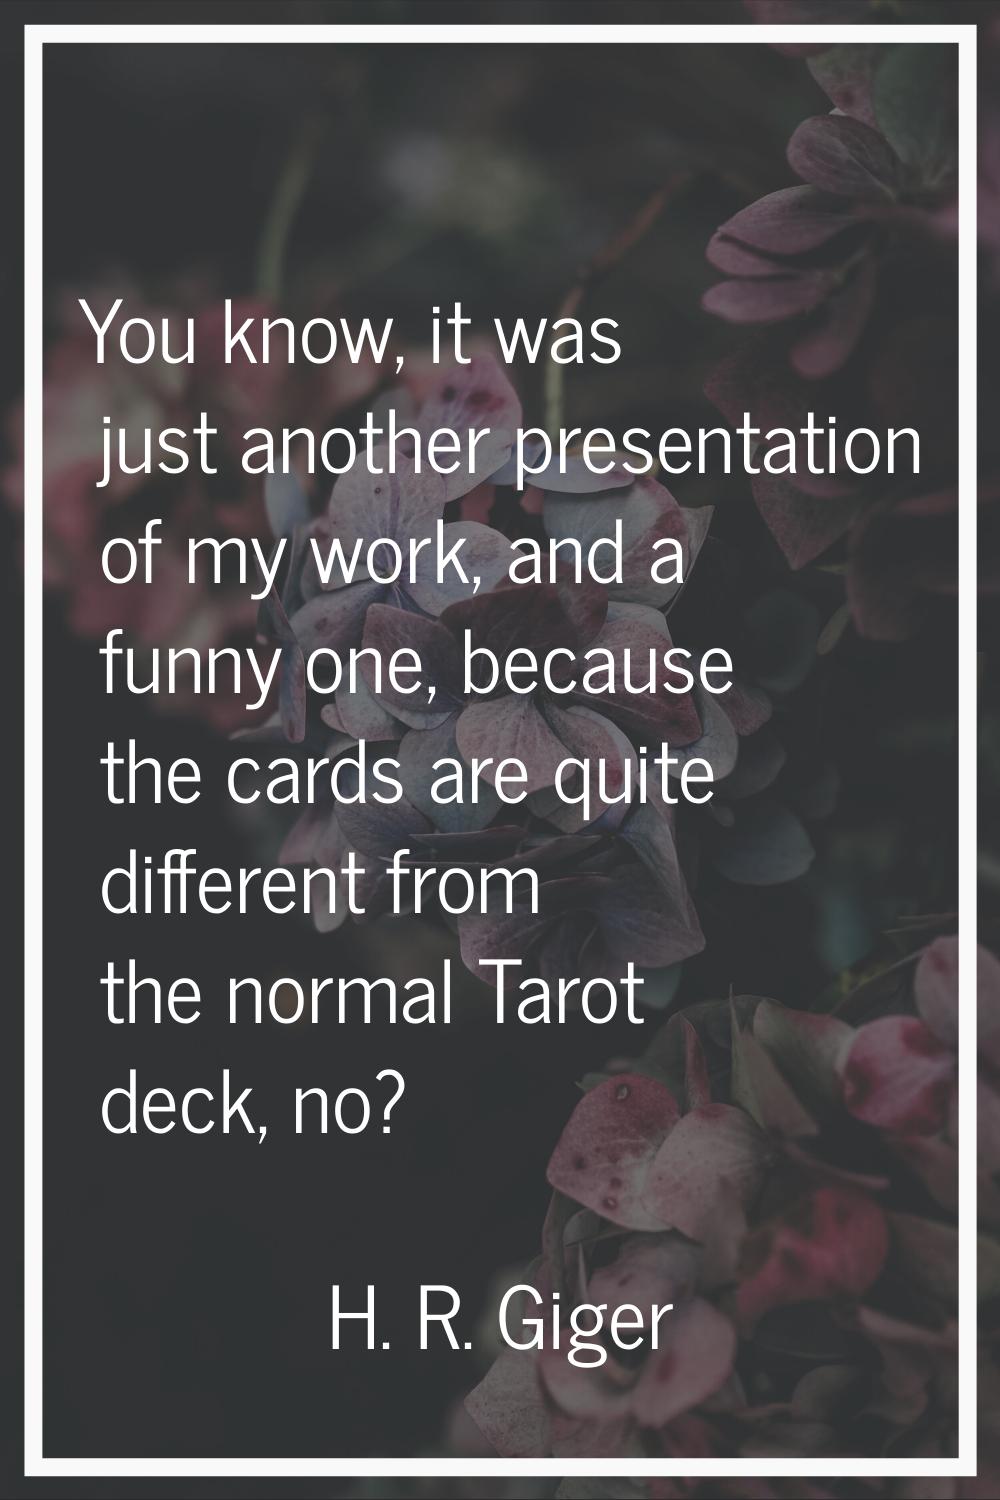 You know, it was just another presentation of my work, and a funny one, because the cards are quite